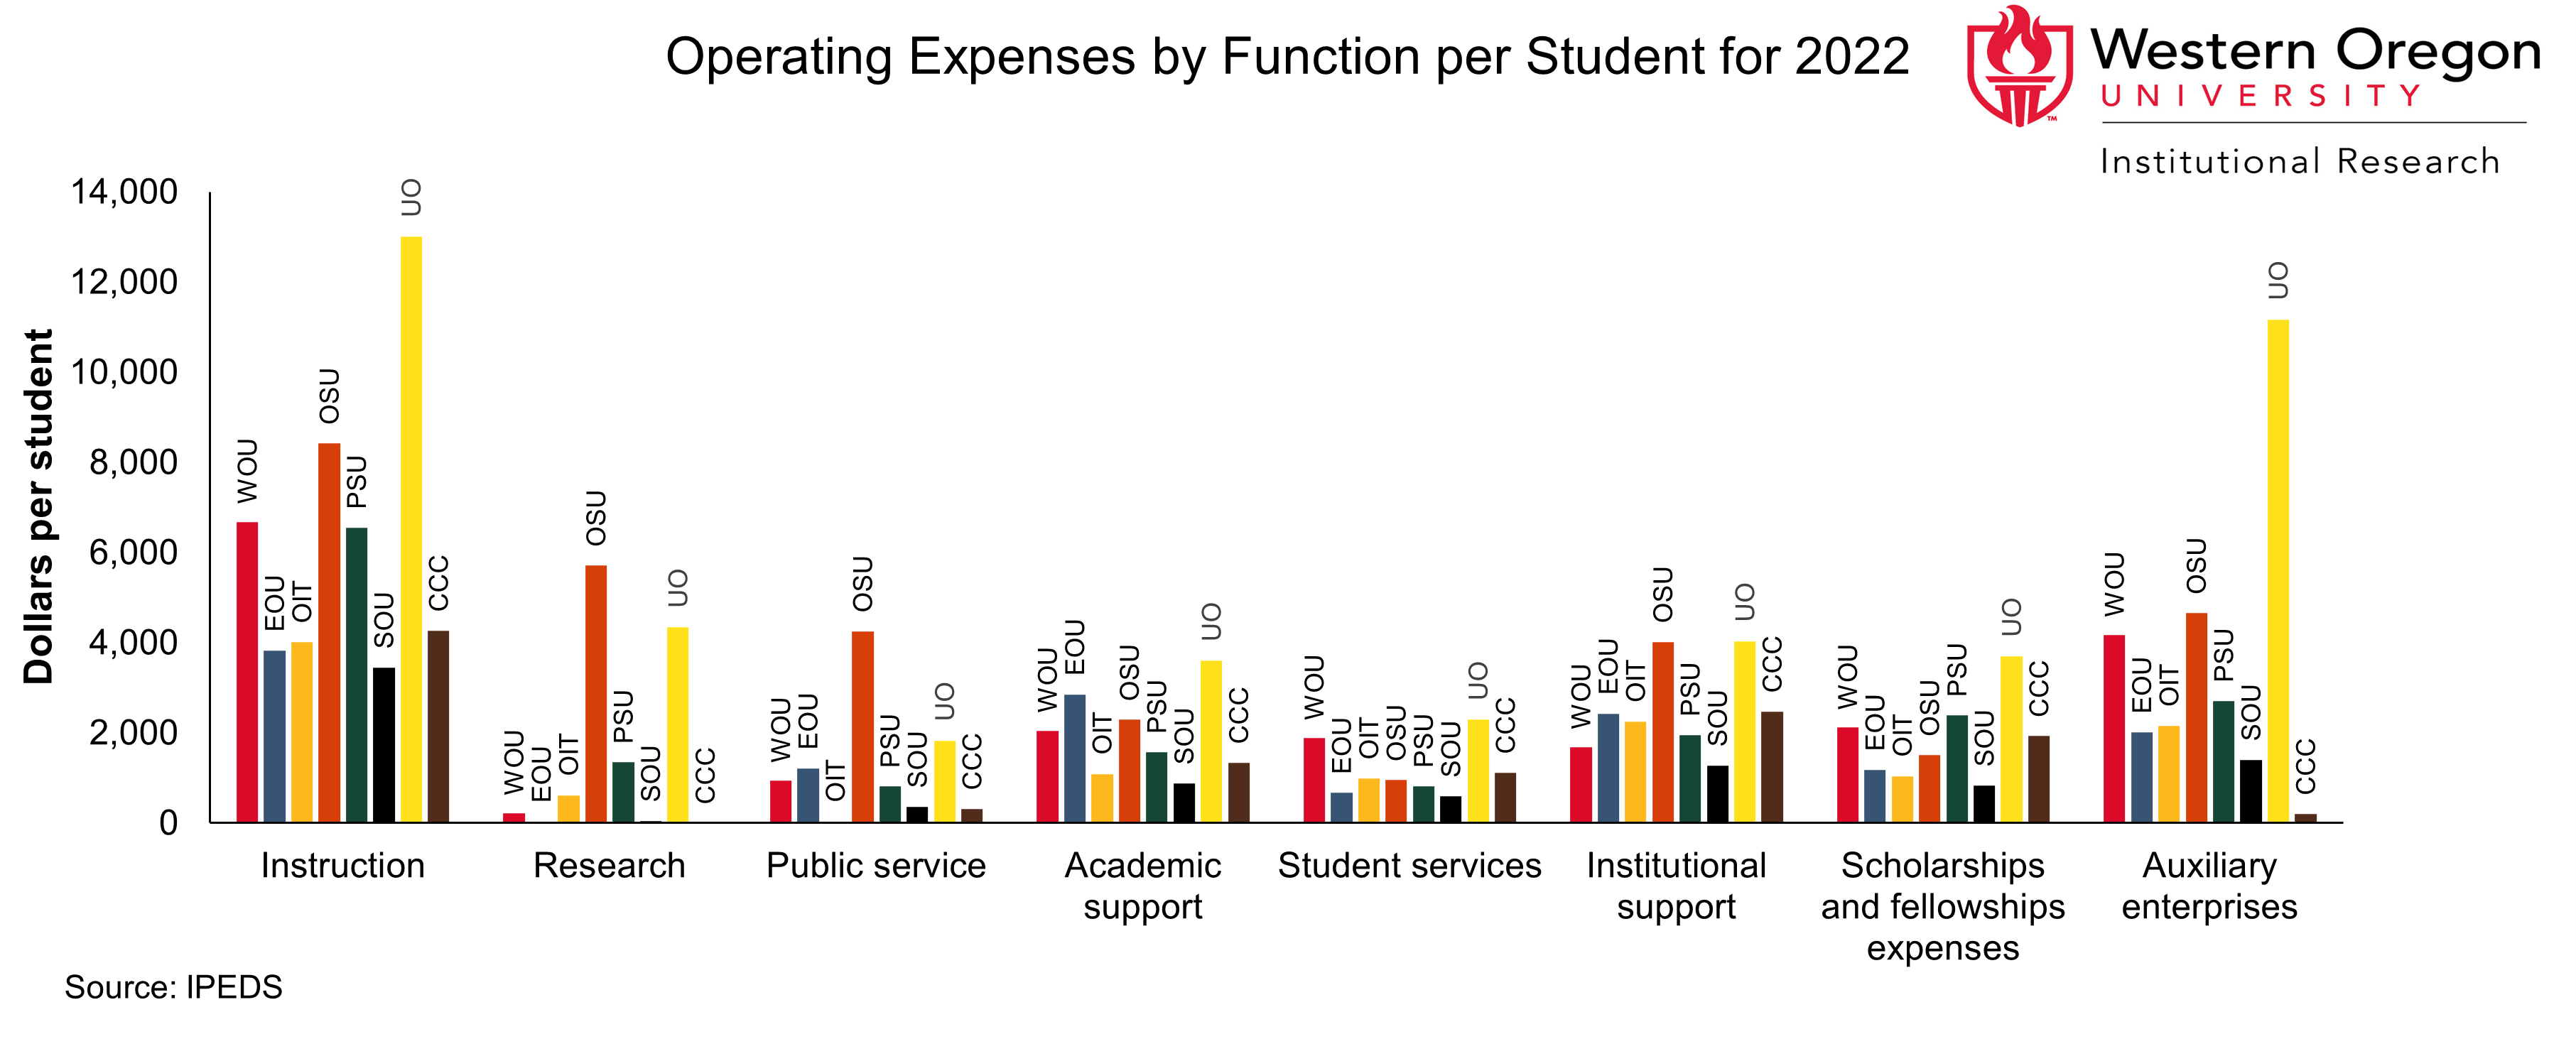 Bar graph of operating expenses per student at WOU and other Oregon Public Universities in fiscal year 2022, broken out by institution and function.